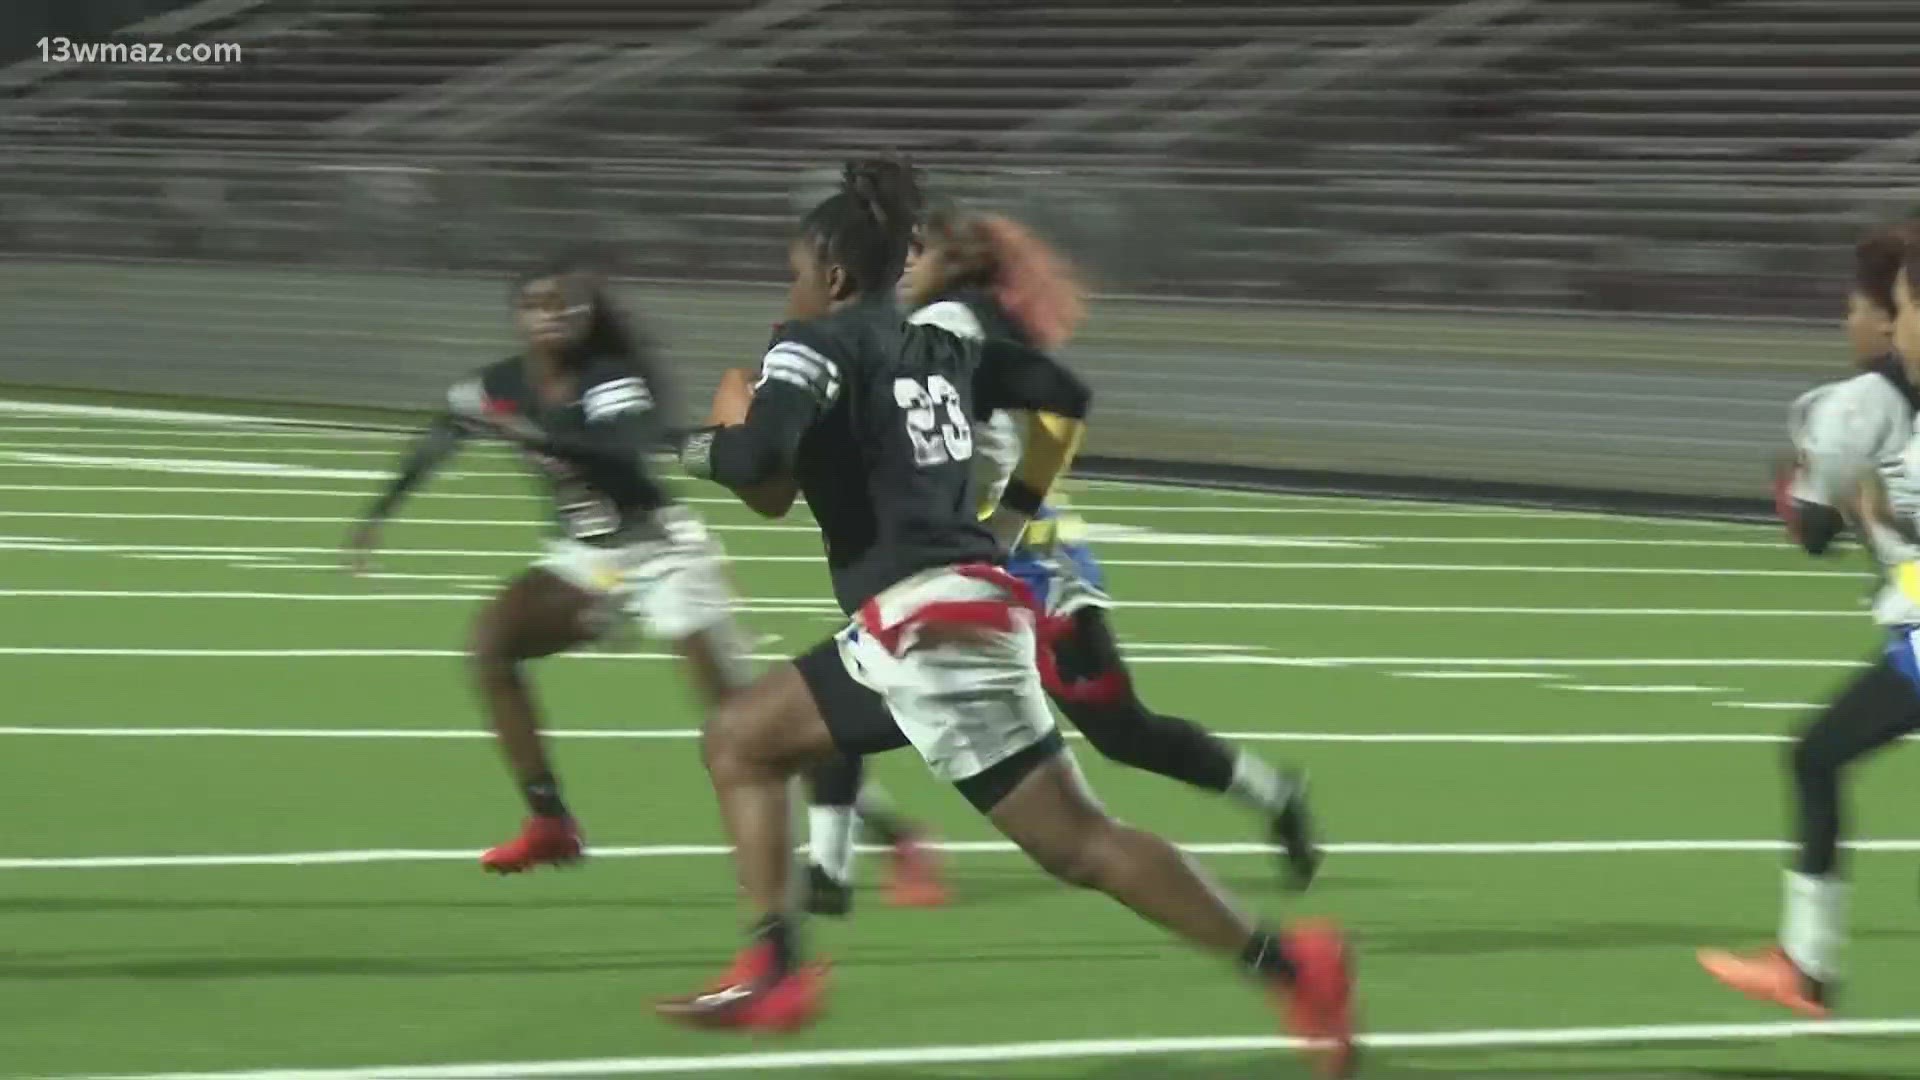 Take a look at these flag football highlights as these players embark on their playoff journeys.